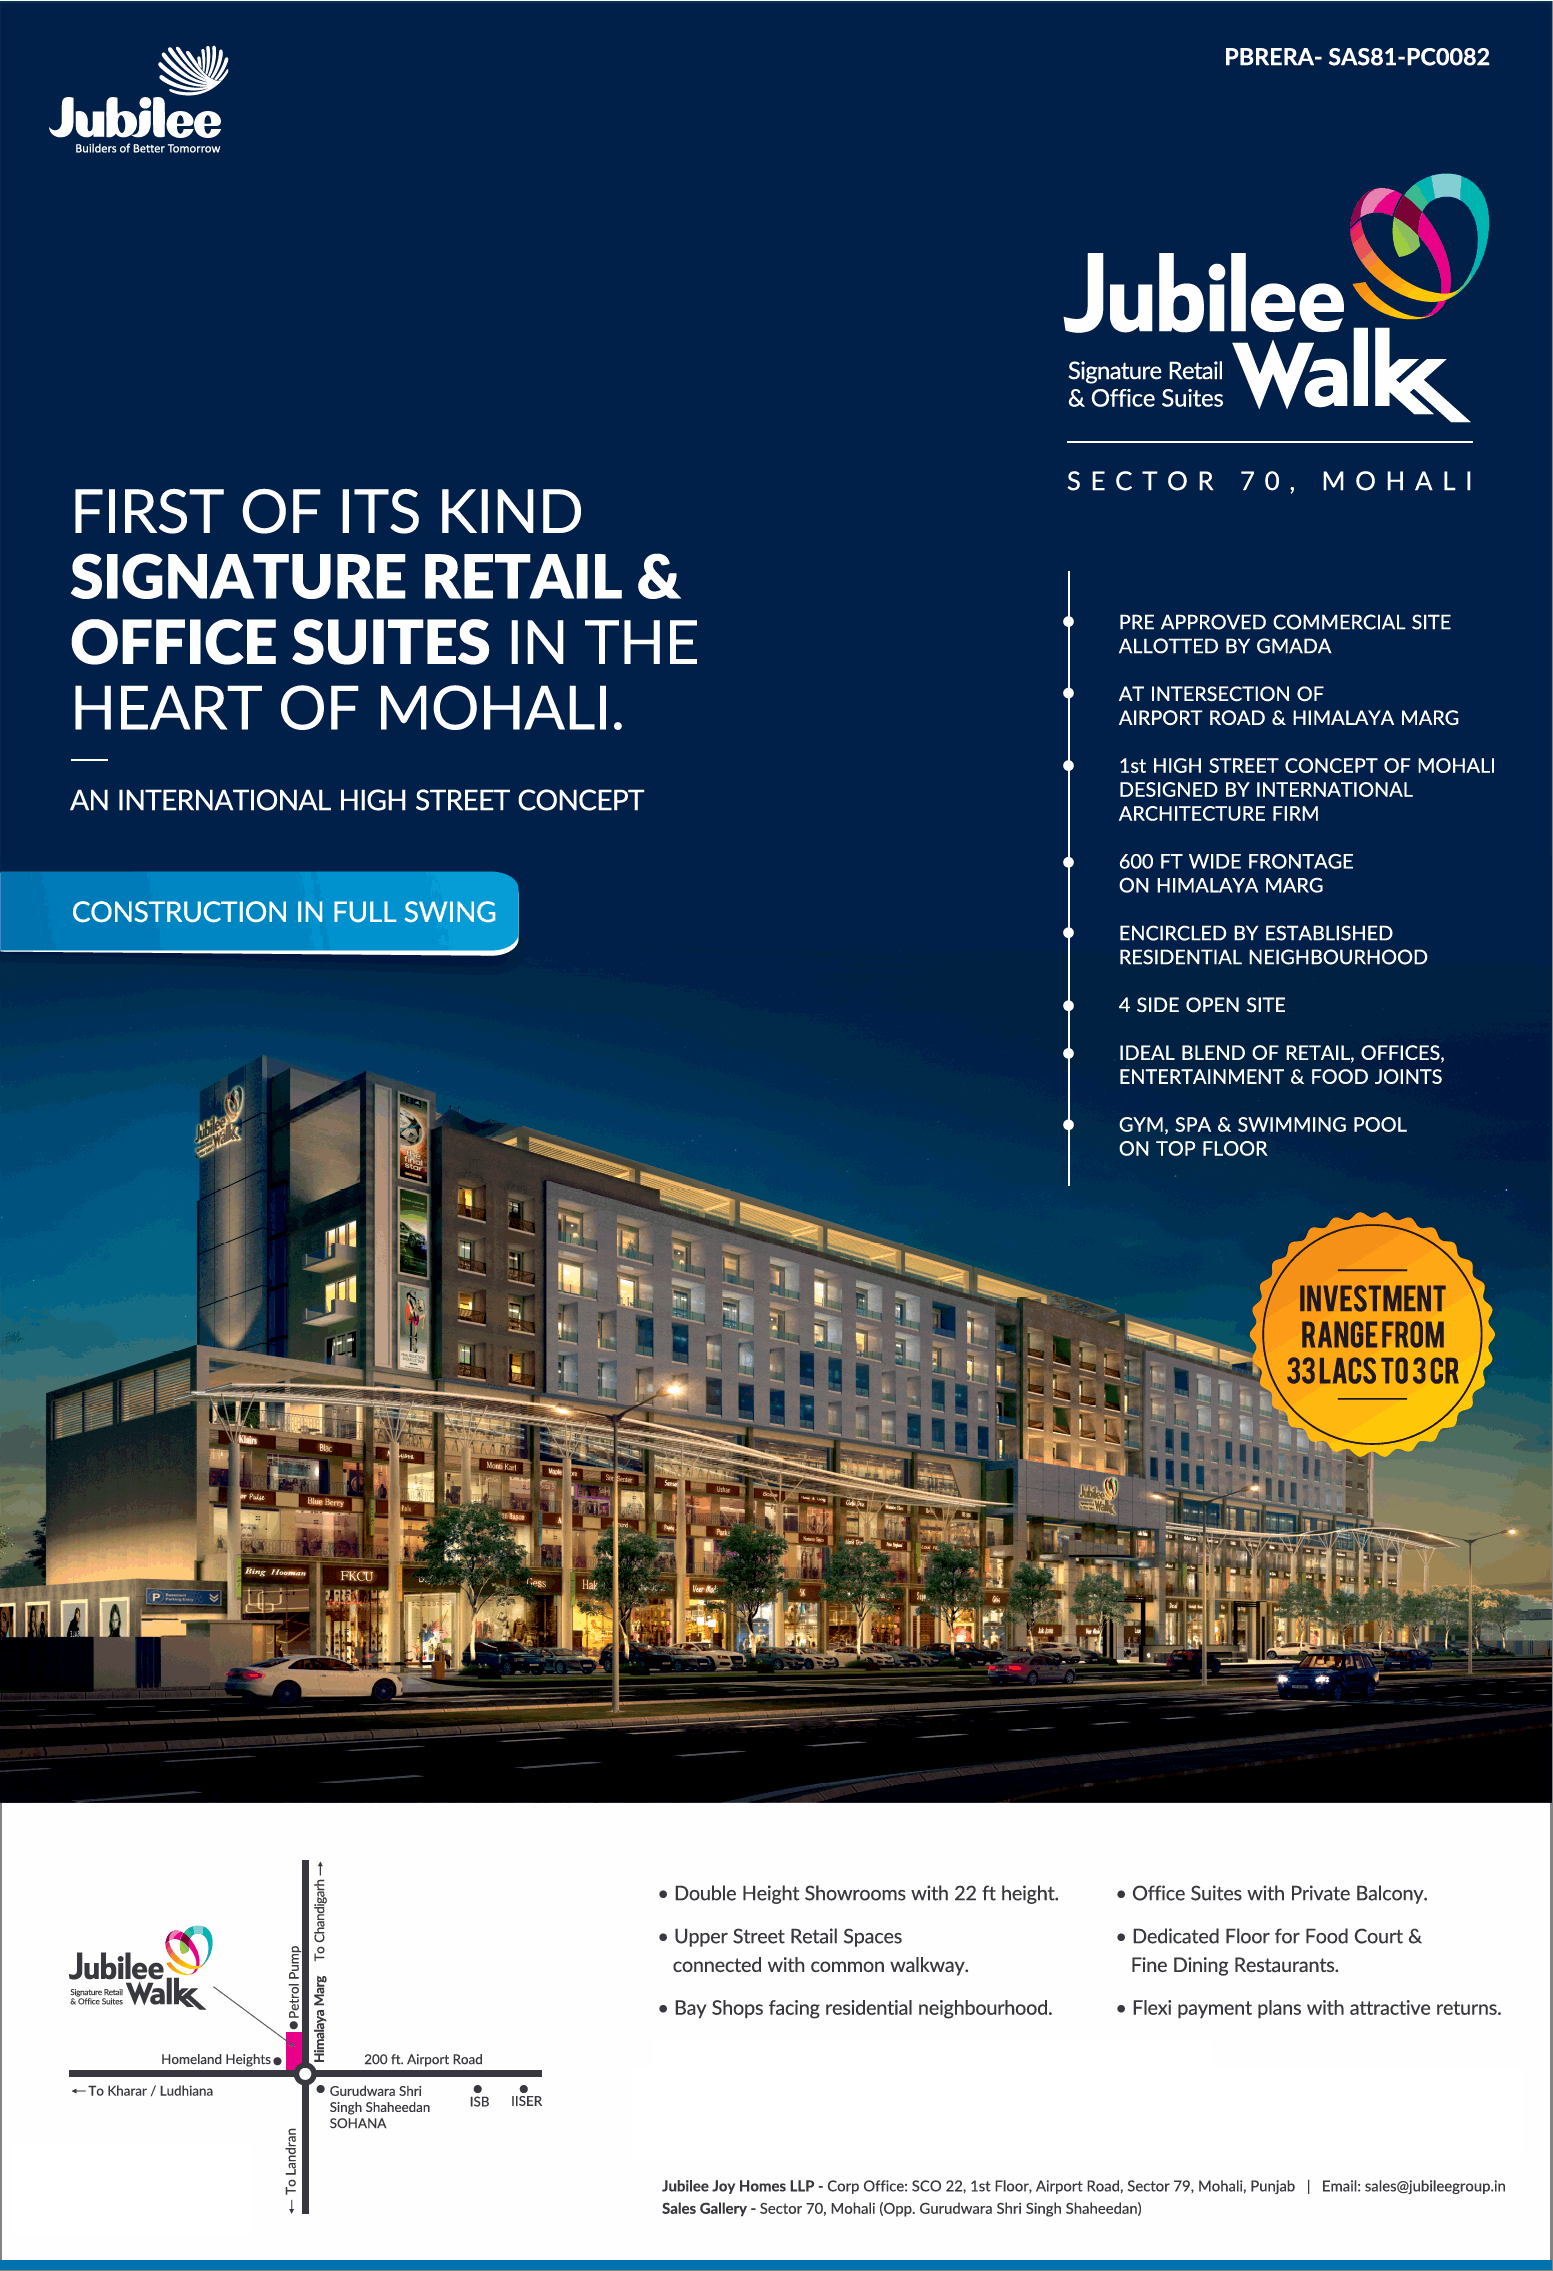 Signature retail and office suites at Jubilee Walk, Mohali Update